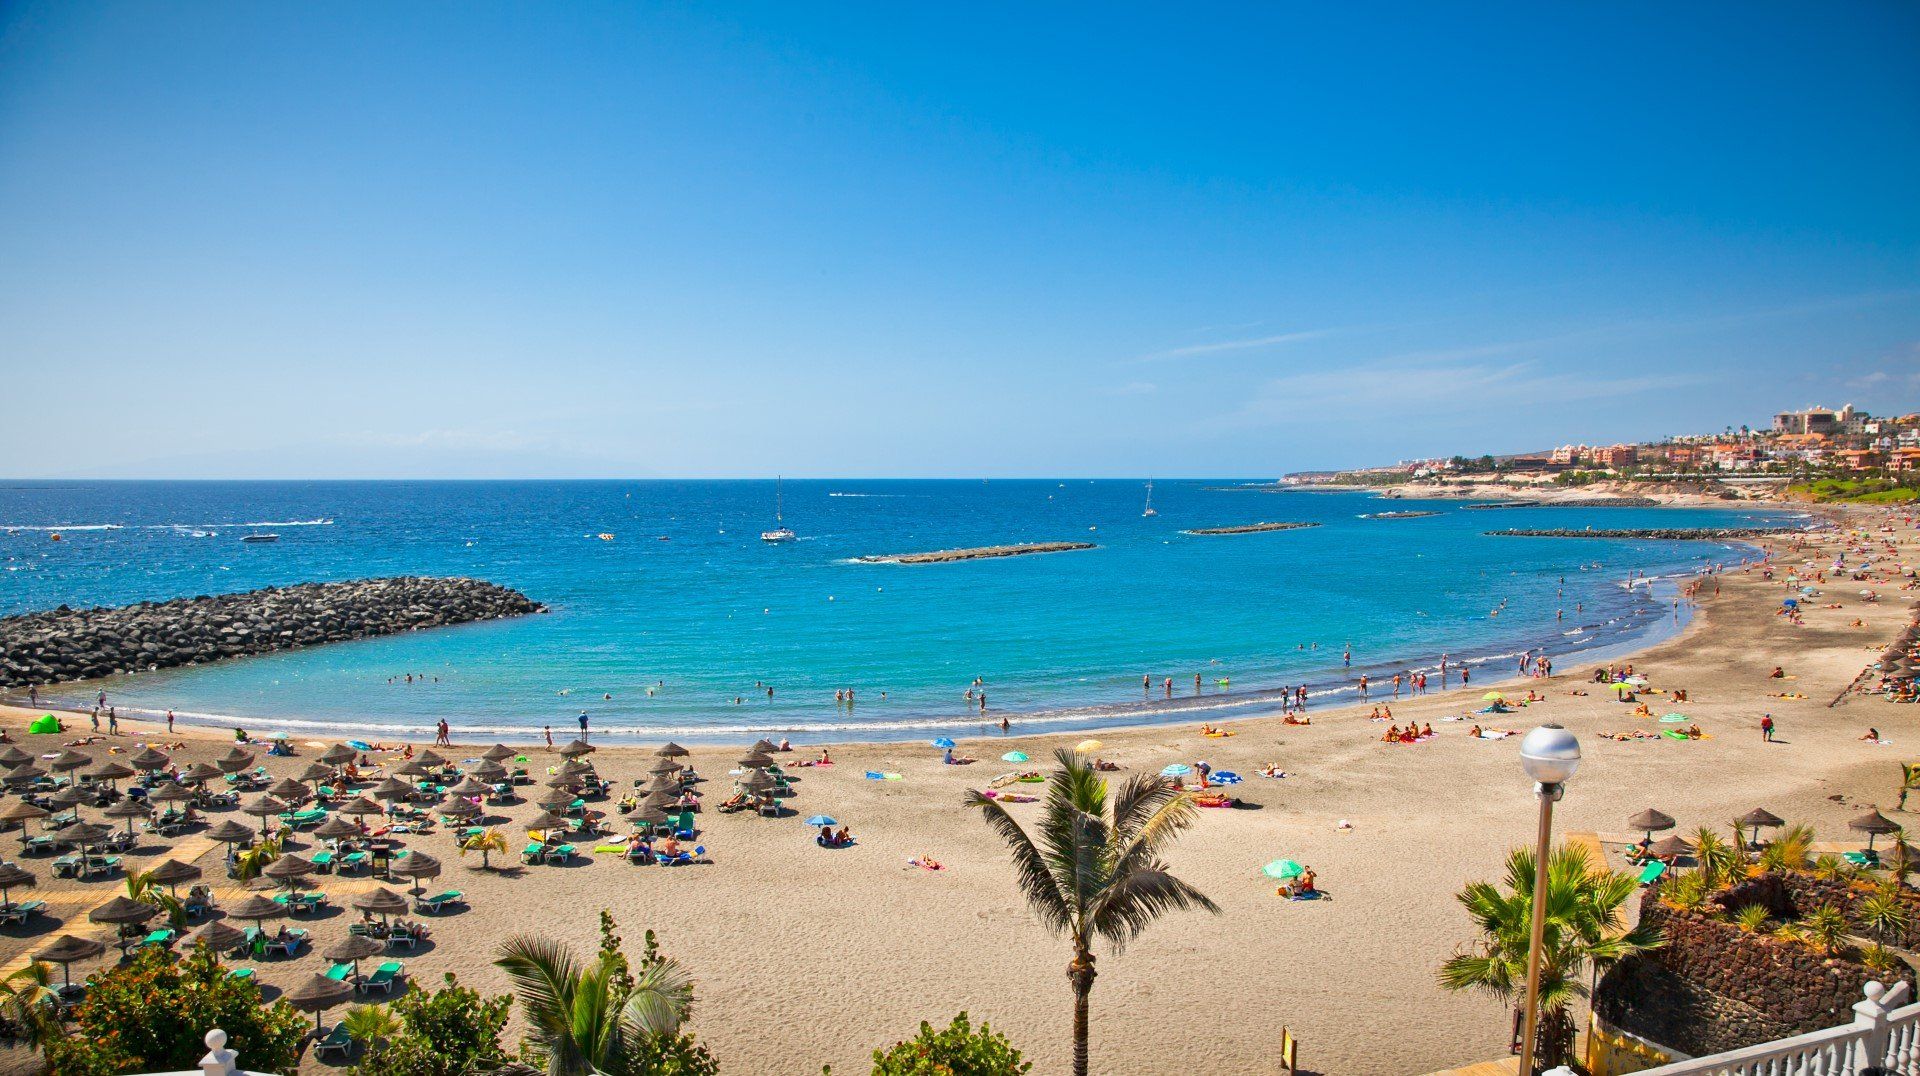 The aerial view of Playa de las Americas' main beach Troya beach, with its golden sand and aquamarine waters